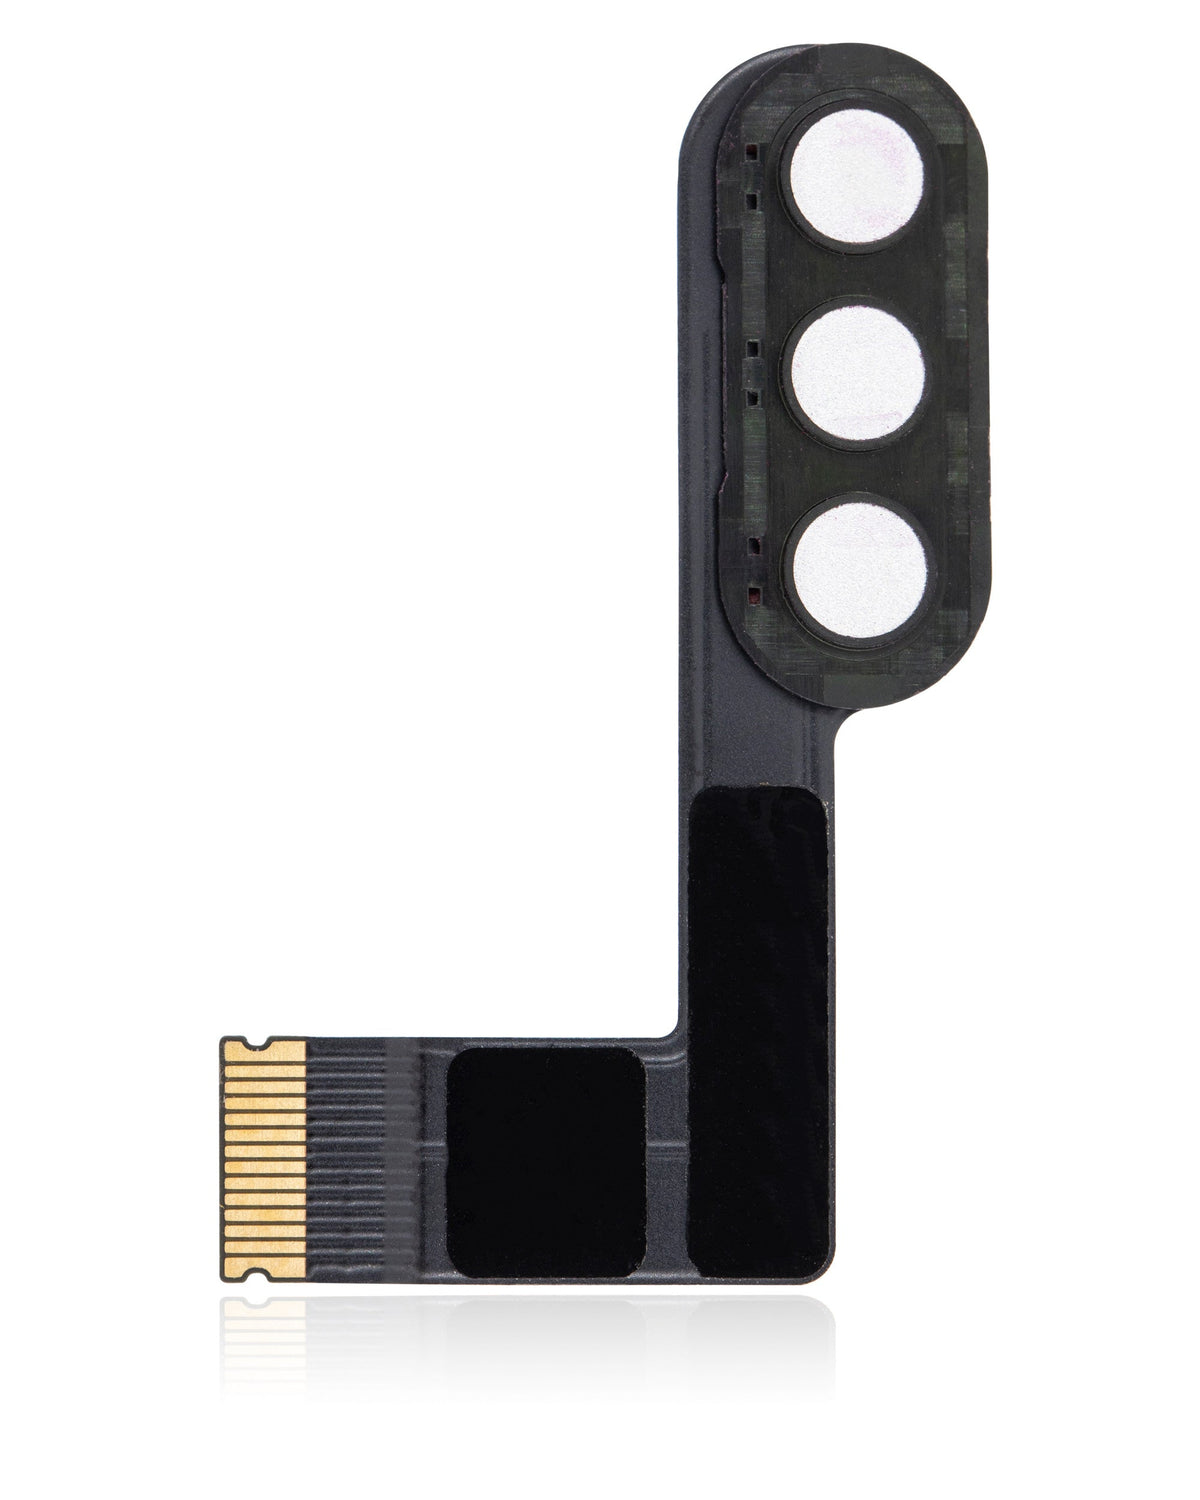 KEYBOARD FLEX CABLE COMPATIBLE FOR IPAD AIR 4/5 - SPACE GRAY